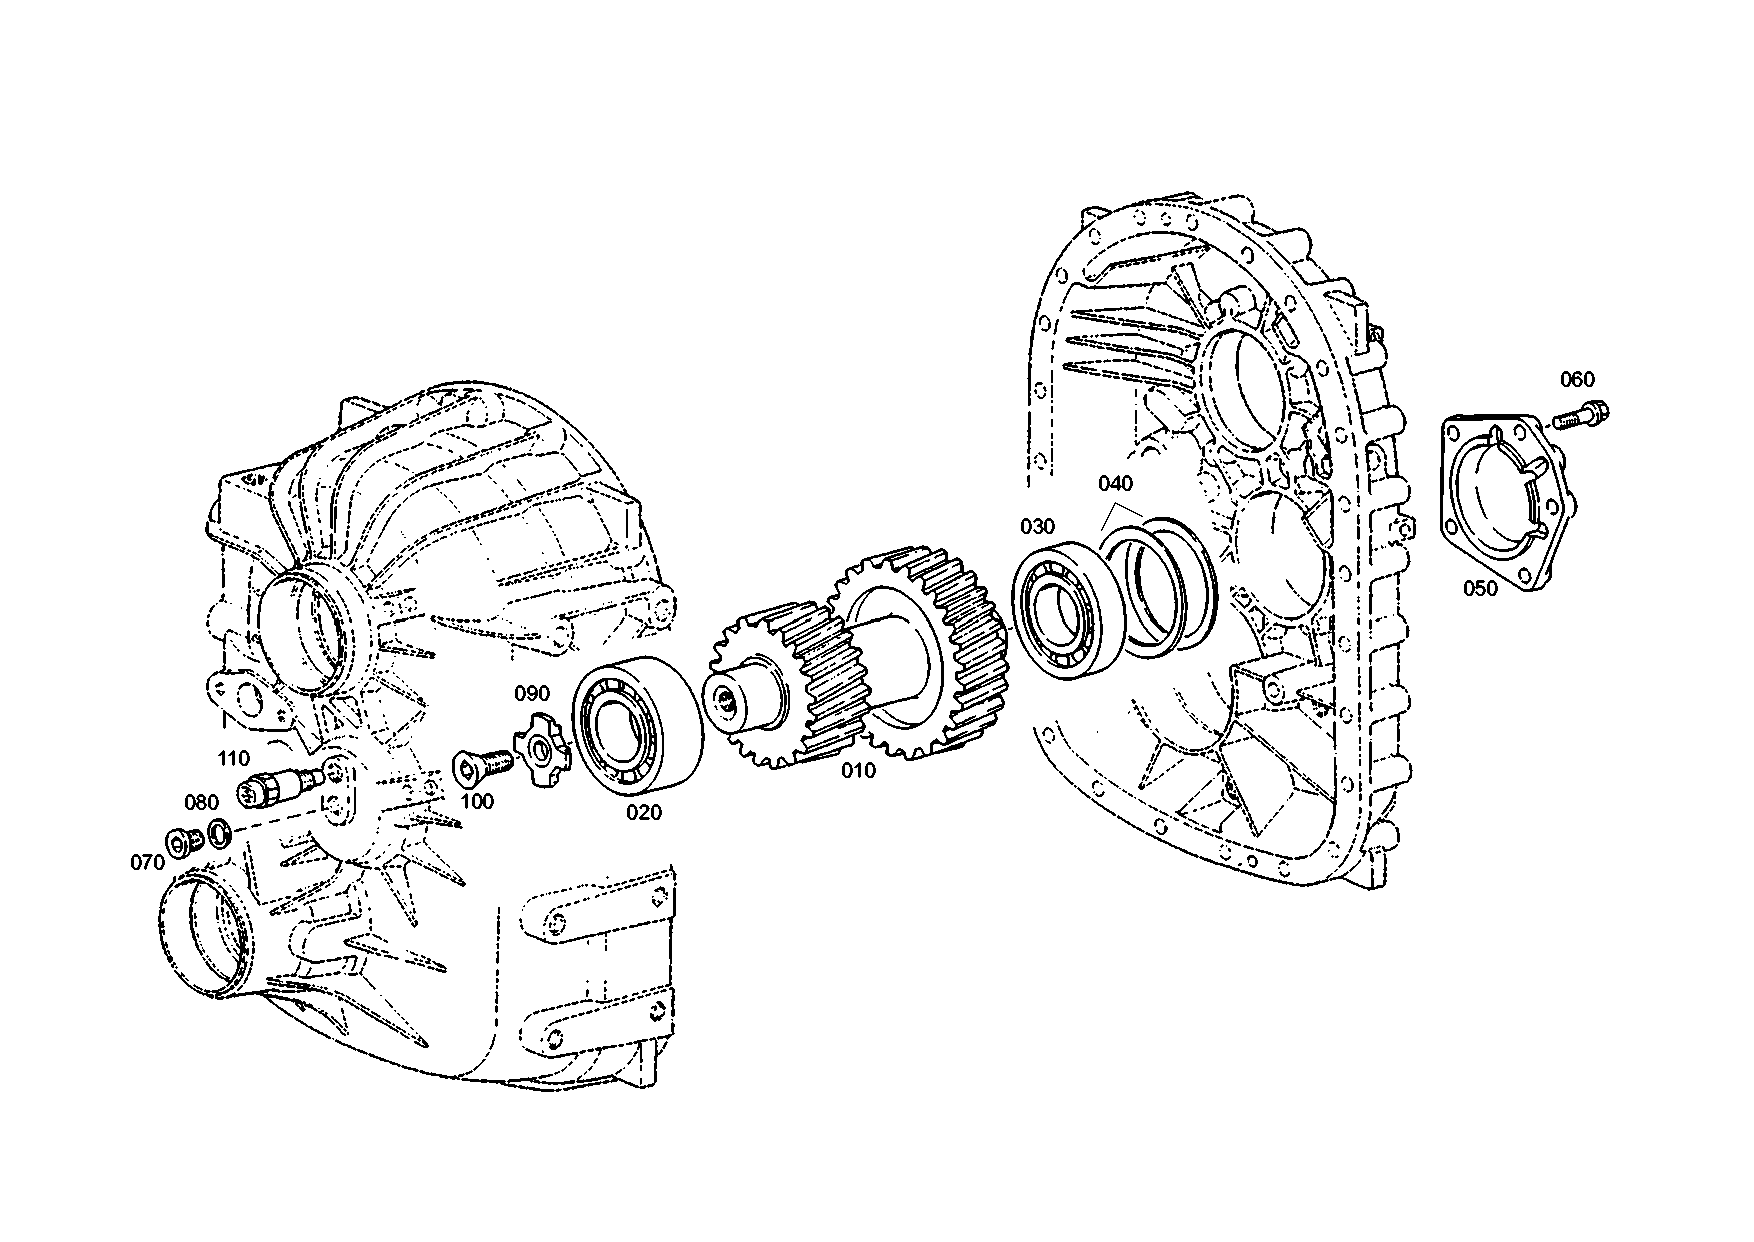 drawing for MARMON Herring MVG751061 - DOUBLE GEAR (figure 3)